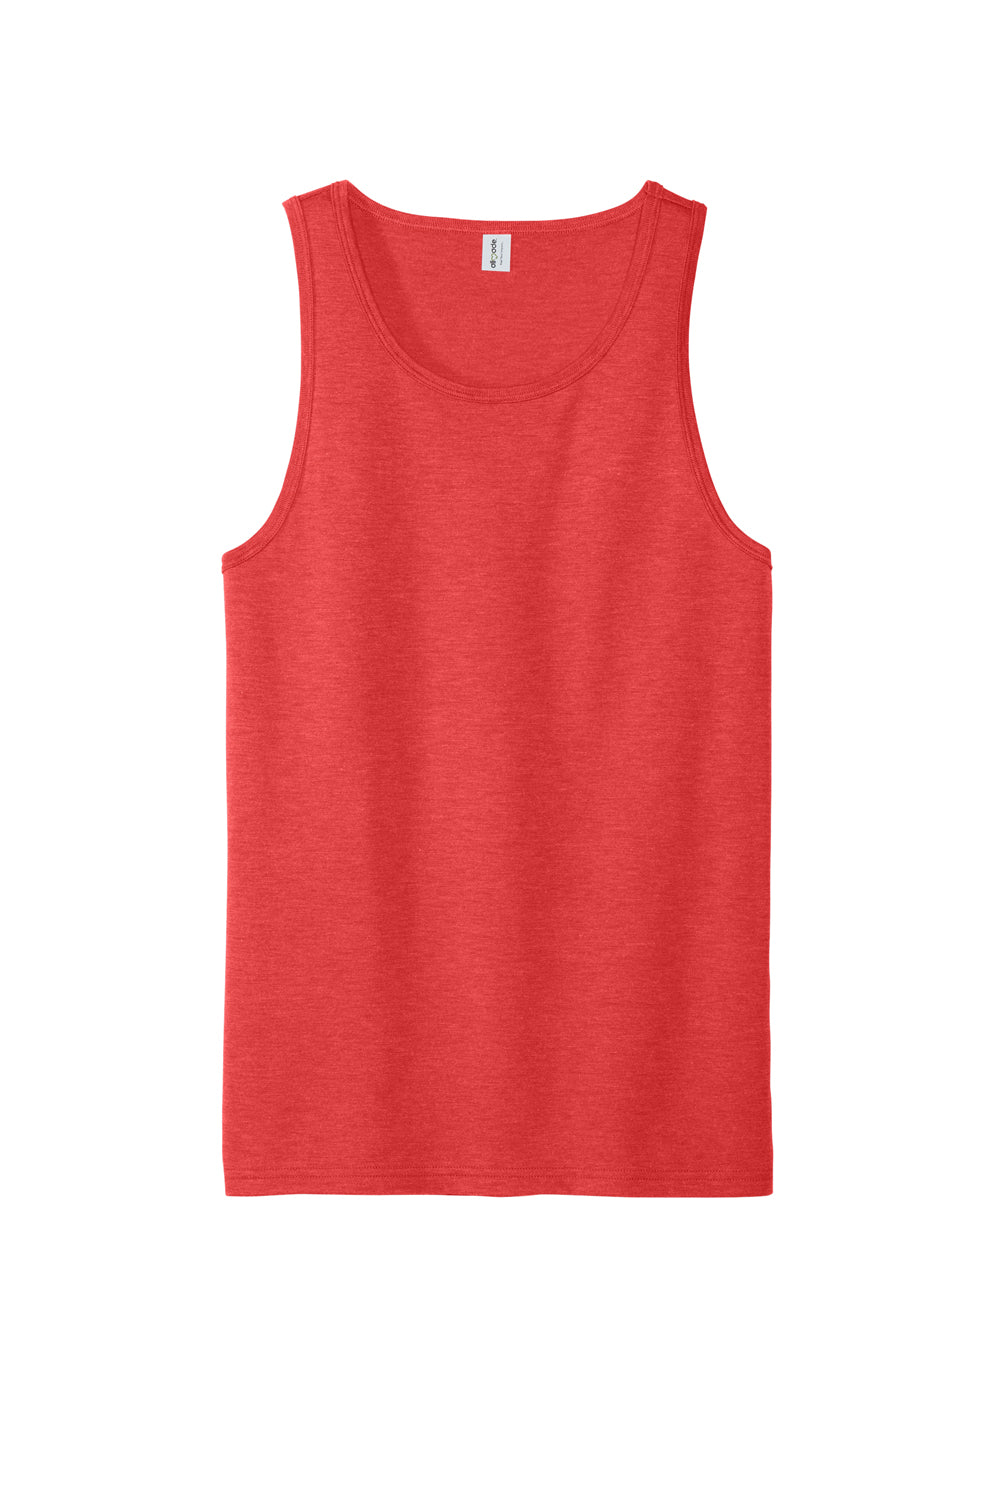 Allmade AL2019 Mens Tank Top Rise Up Red Flat Front